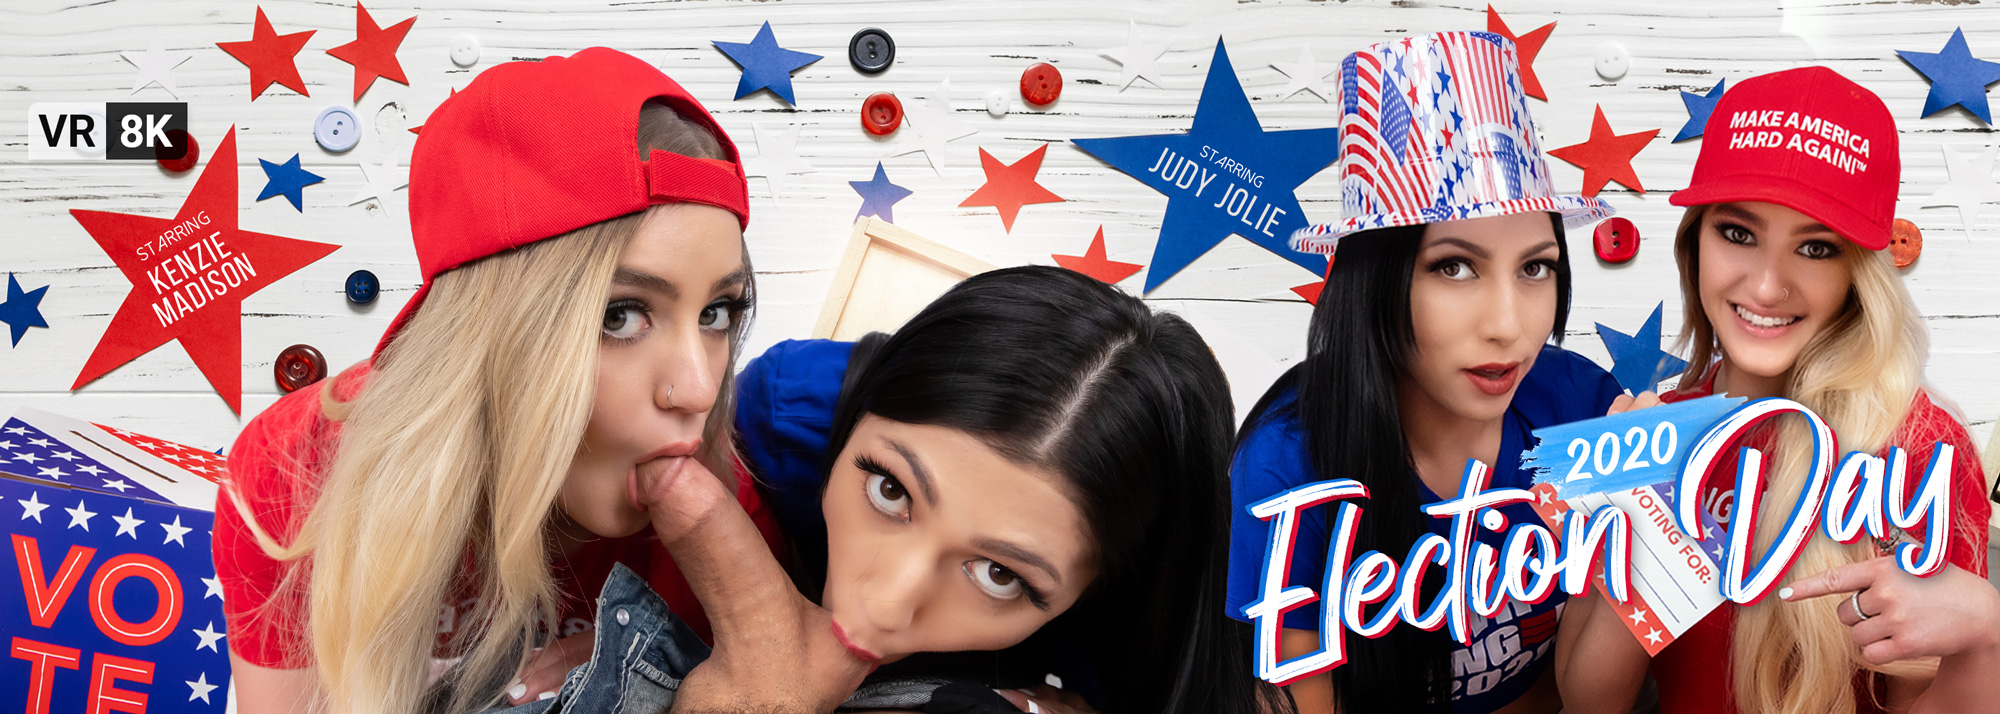 Election Day 2020 - VR Porn Video, Starring: Kenzie Madison, Judy Jolie